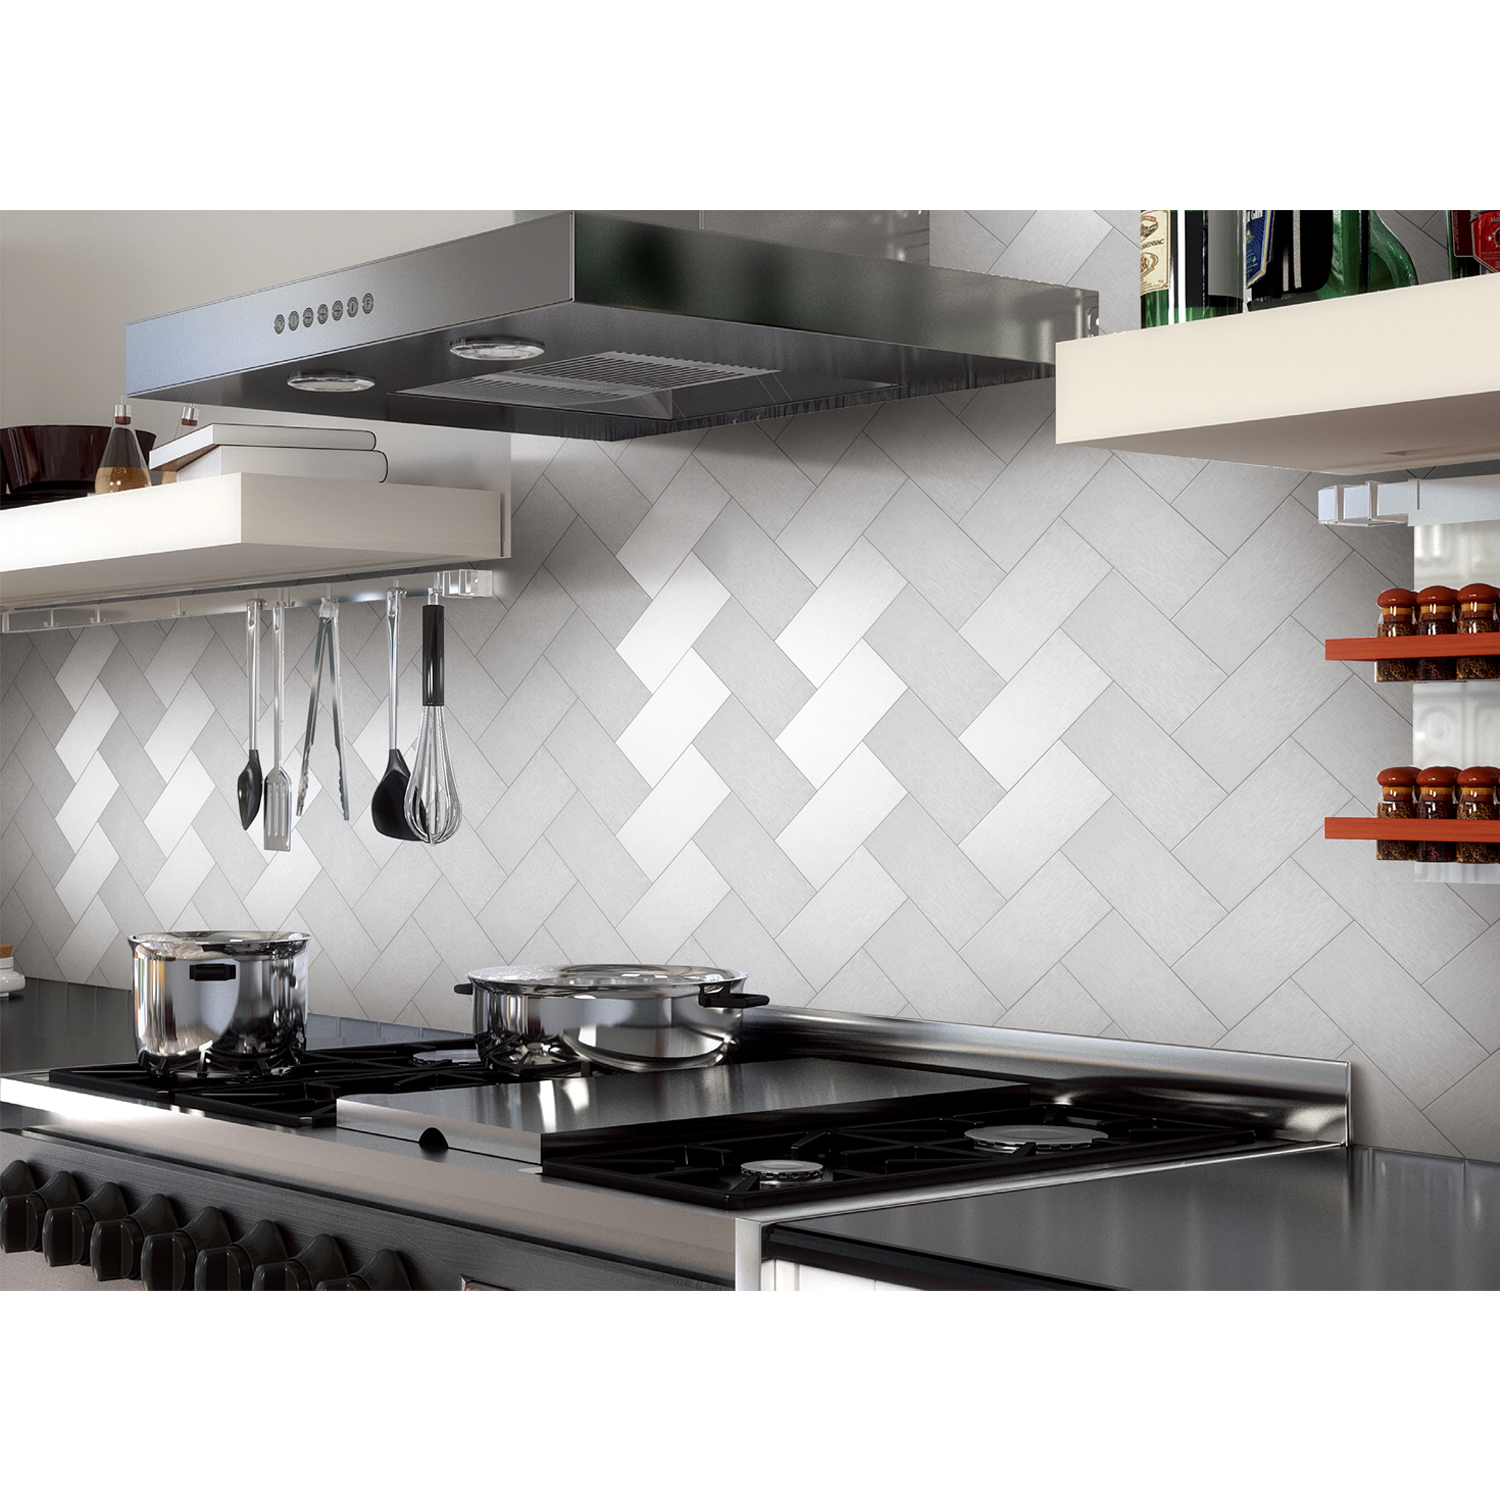 A16021 4 Peel And Stick Kitchen Backsplash Adhesive Metal Tiles For Wall 